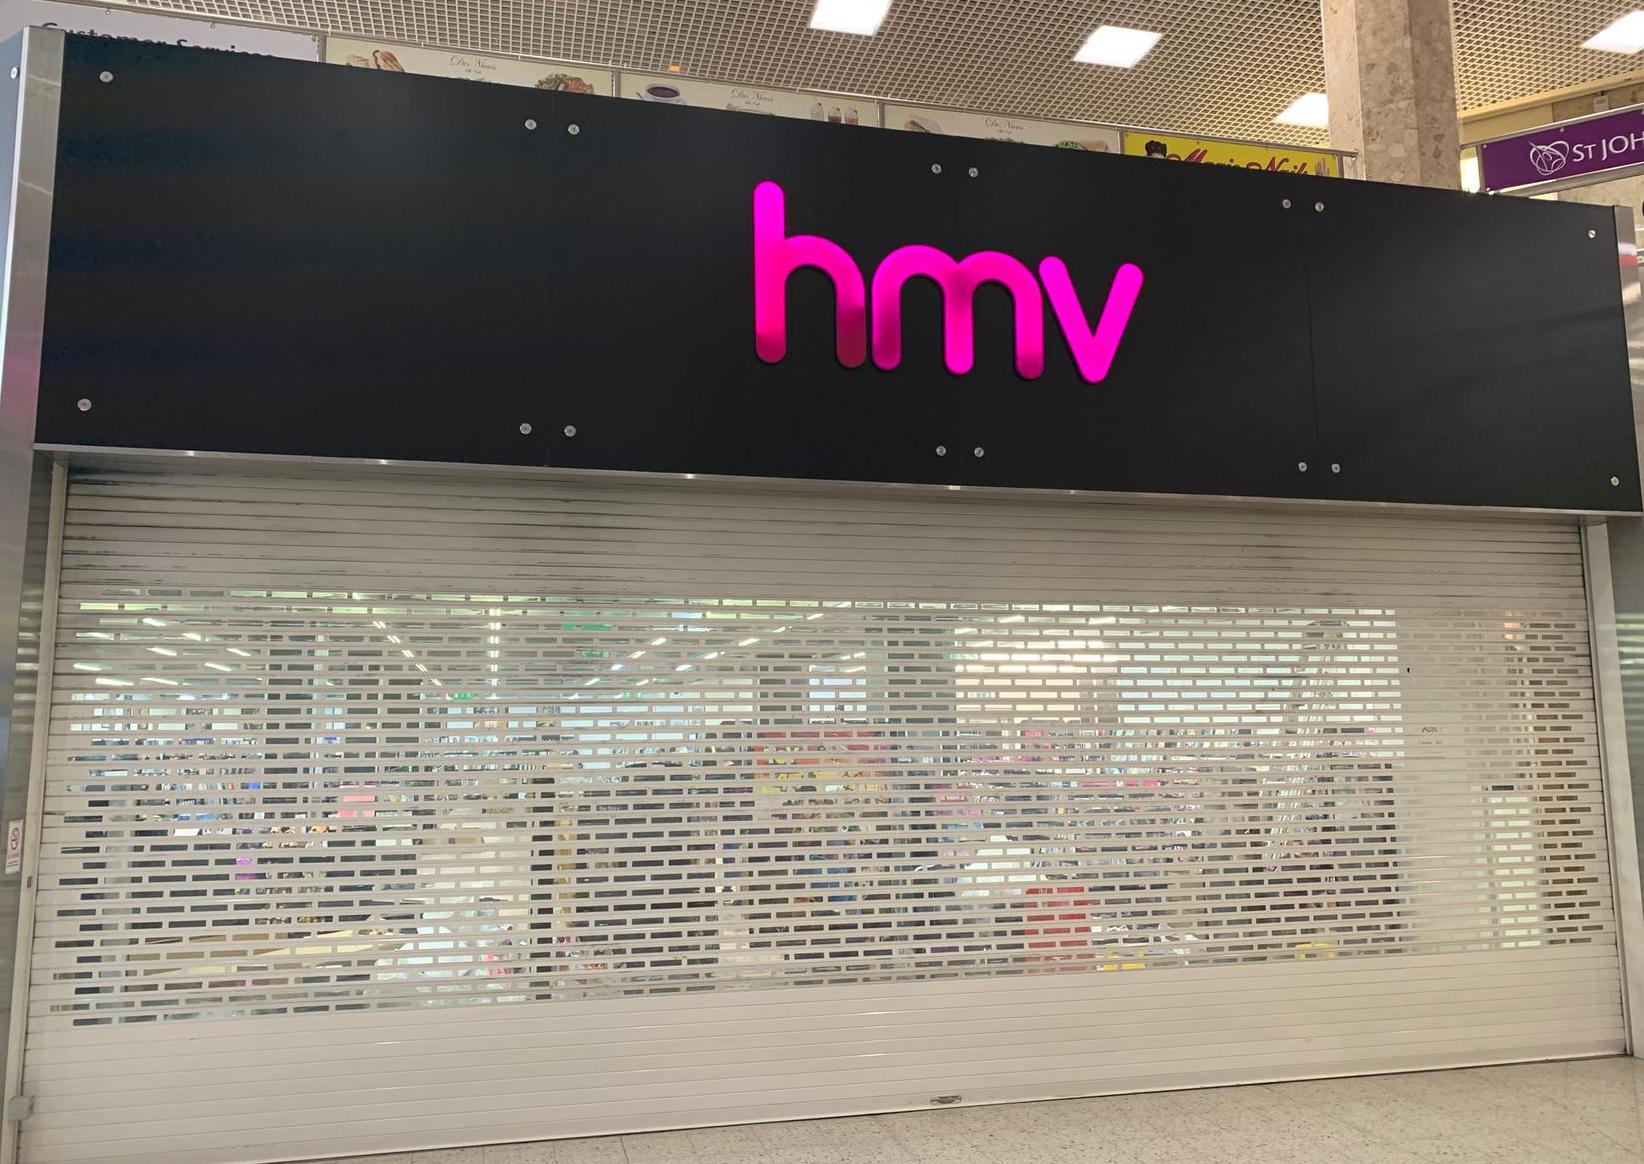 A new HMV store look set to open in St John's Shopping Centre